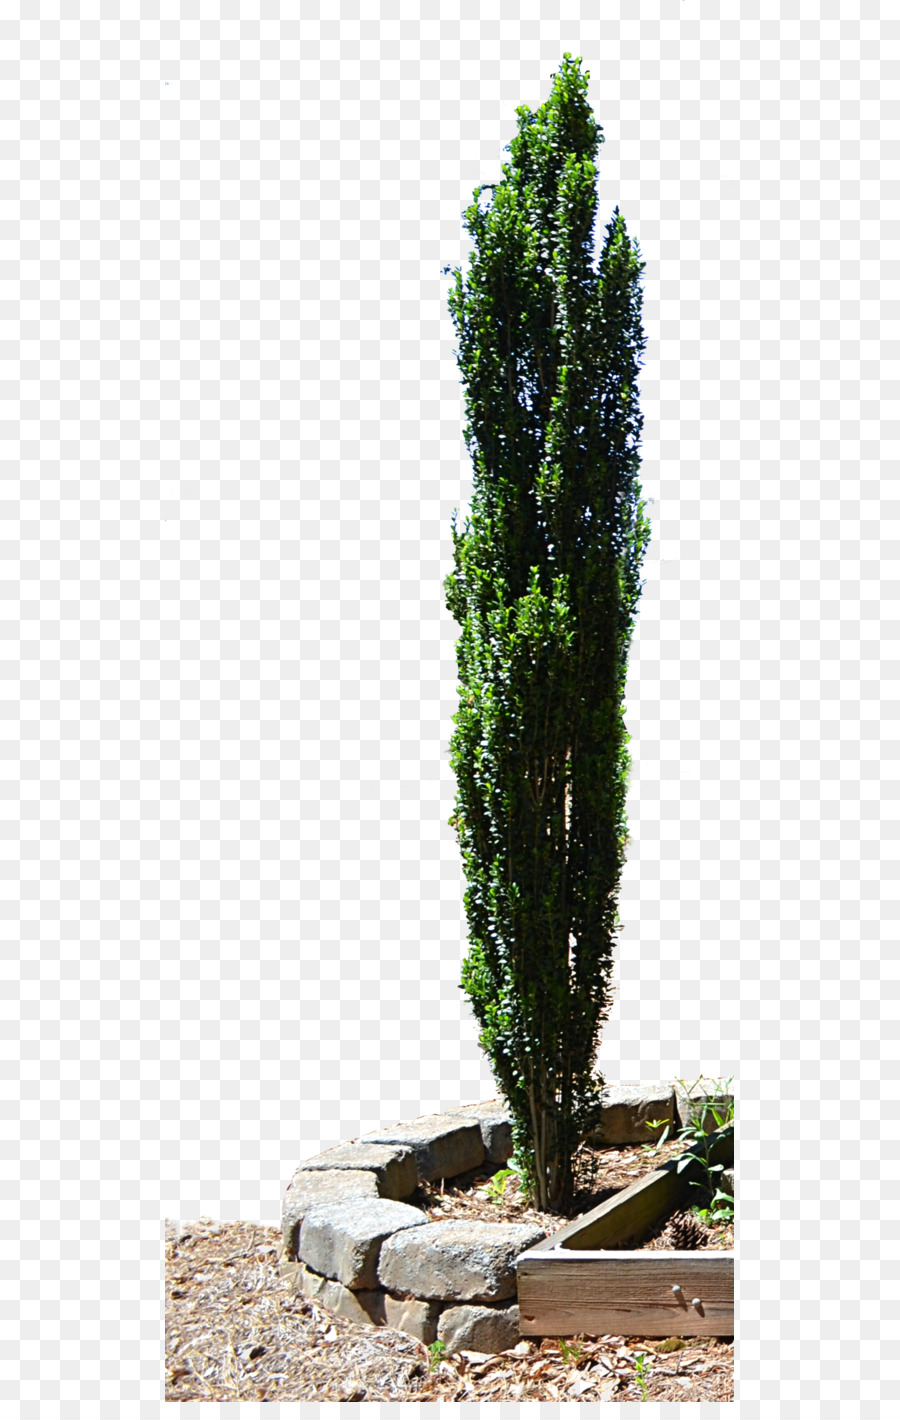 Spruce Mediterranean cypress Evergreen Tree Planter - tree png download - 569*1402 - Free Transparent Spruce png Download.